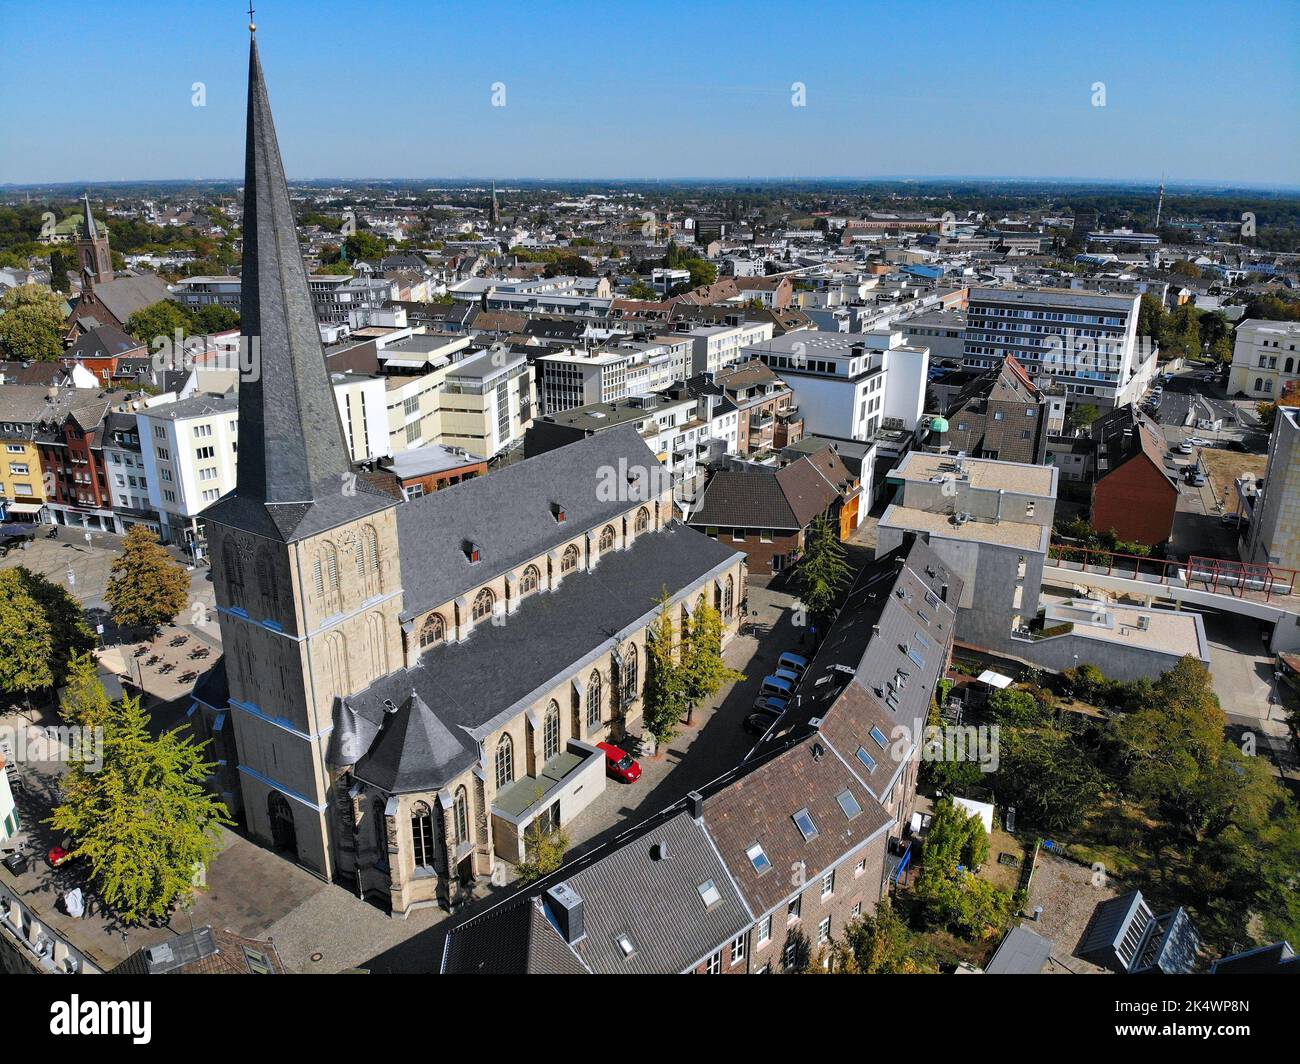 Moenchengladbach city in Germany. Aerial view of Gladbach part of town. Stock Photo